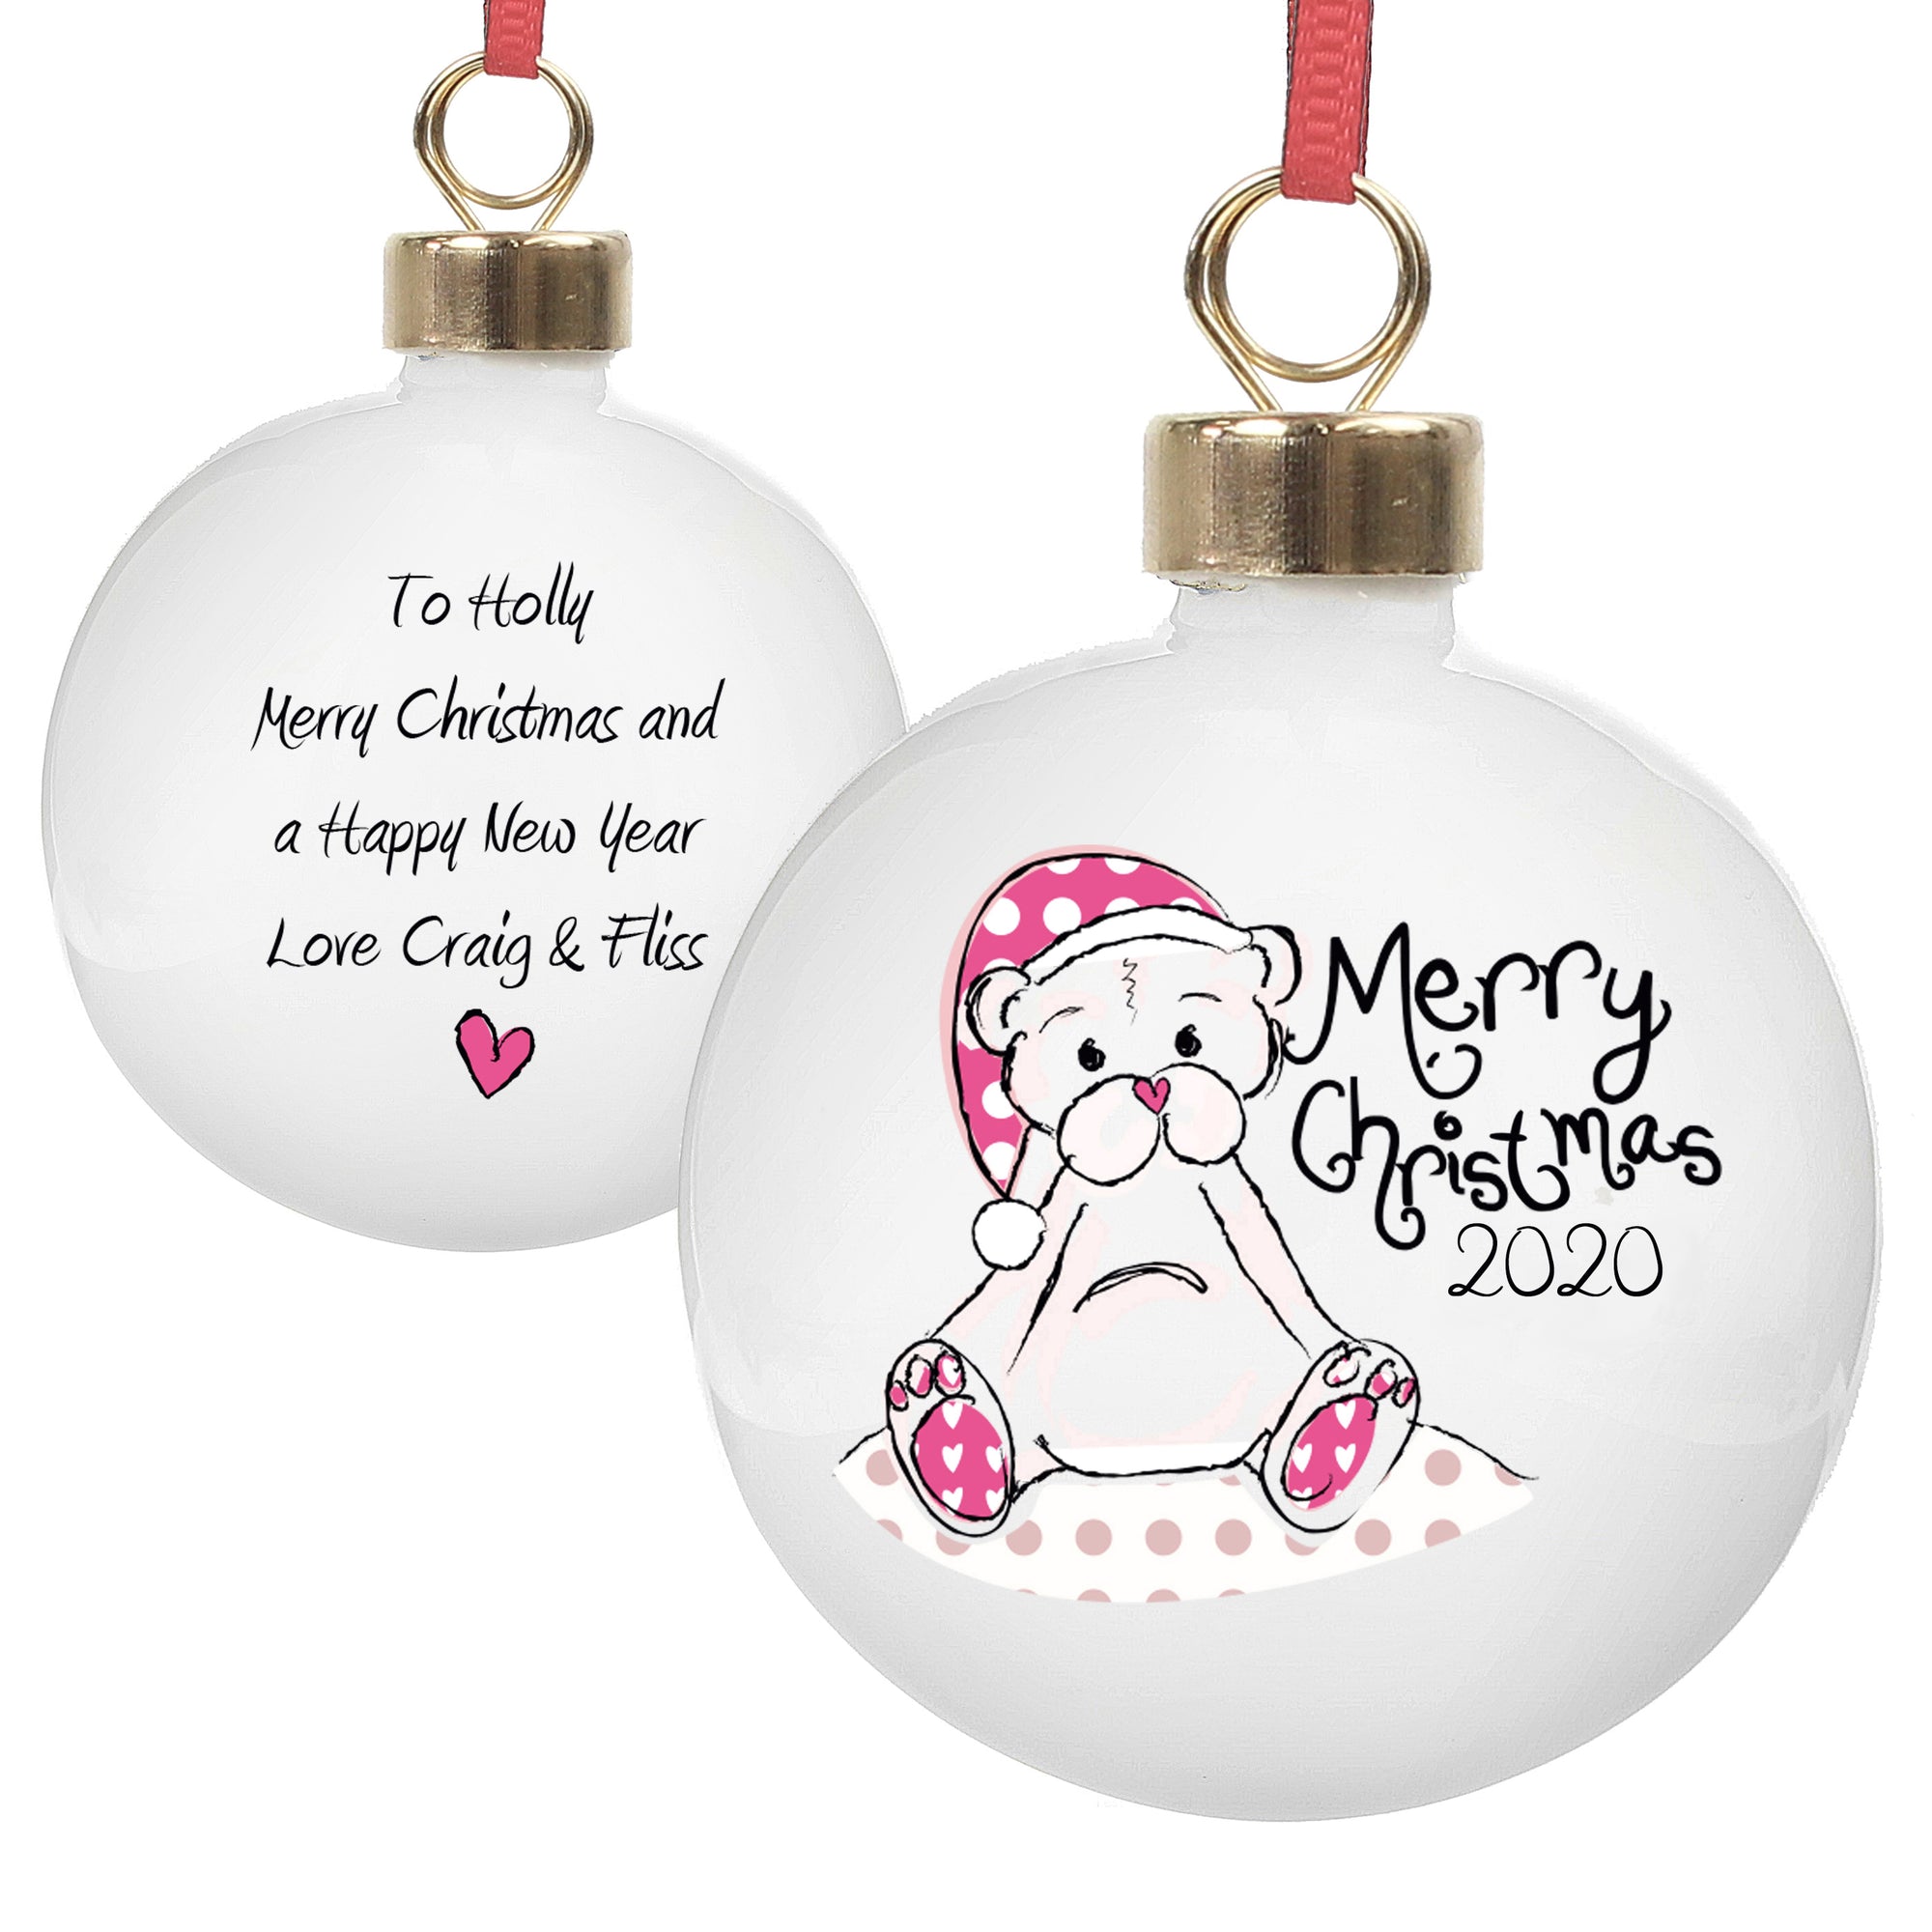 Personalised white ceramic round Christmas bauble which features an image of a hand-drawn teddy bear wearing a Christmas hat and the wording 'Merry Christmas' in a hand-written font.  You can add a year to the front of the bauble which will be printed below the 'Merry Christmas' and on the back, you can add your own special message over up to 4 lines. The bauble comes with a ribbon ready to hang it on a tree.